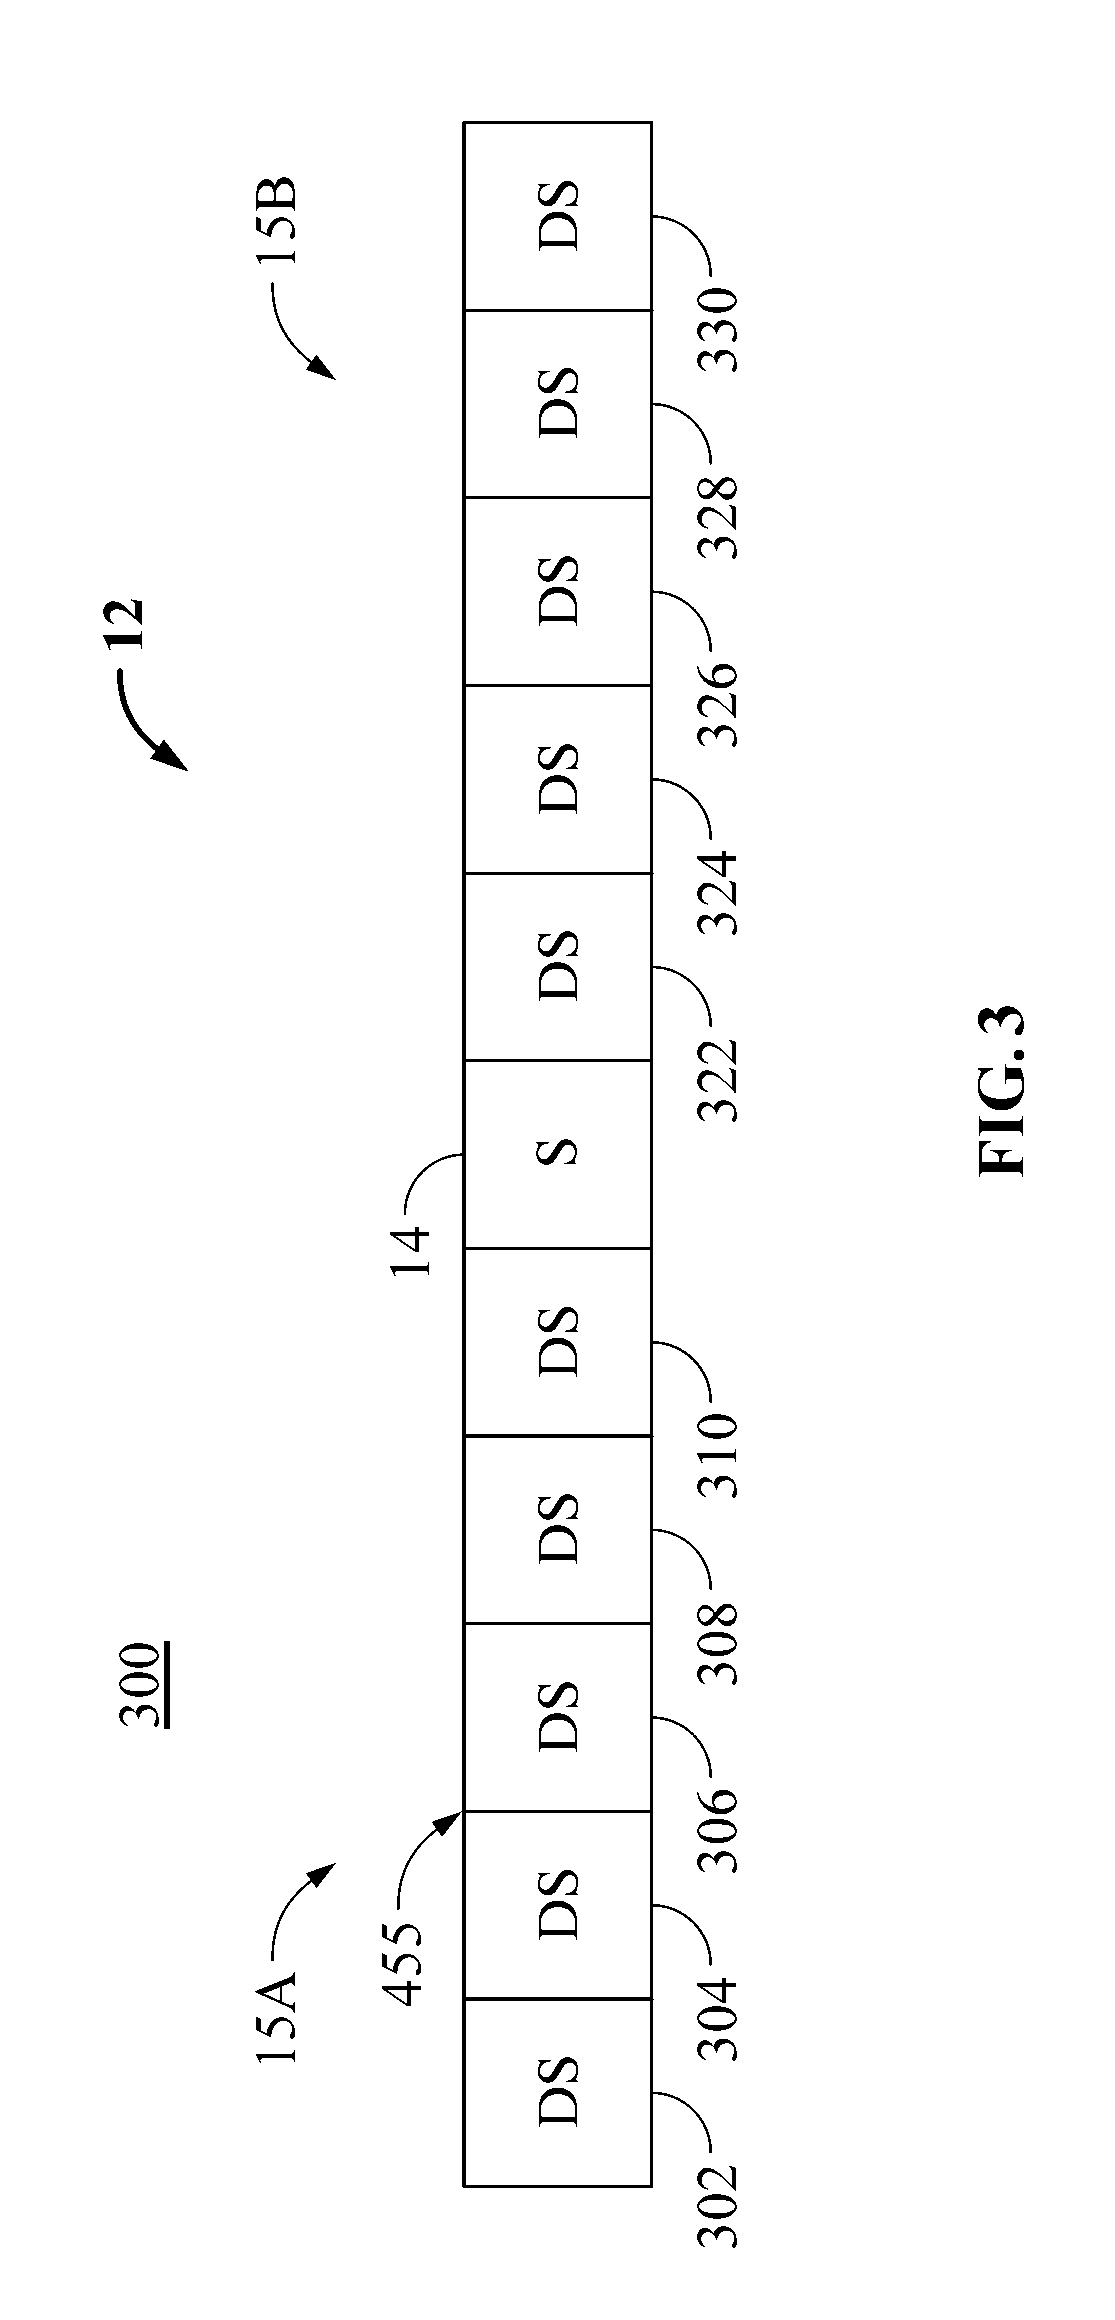 Disk drive including a delay circuit to provide a delayed reset signal